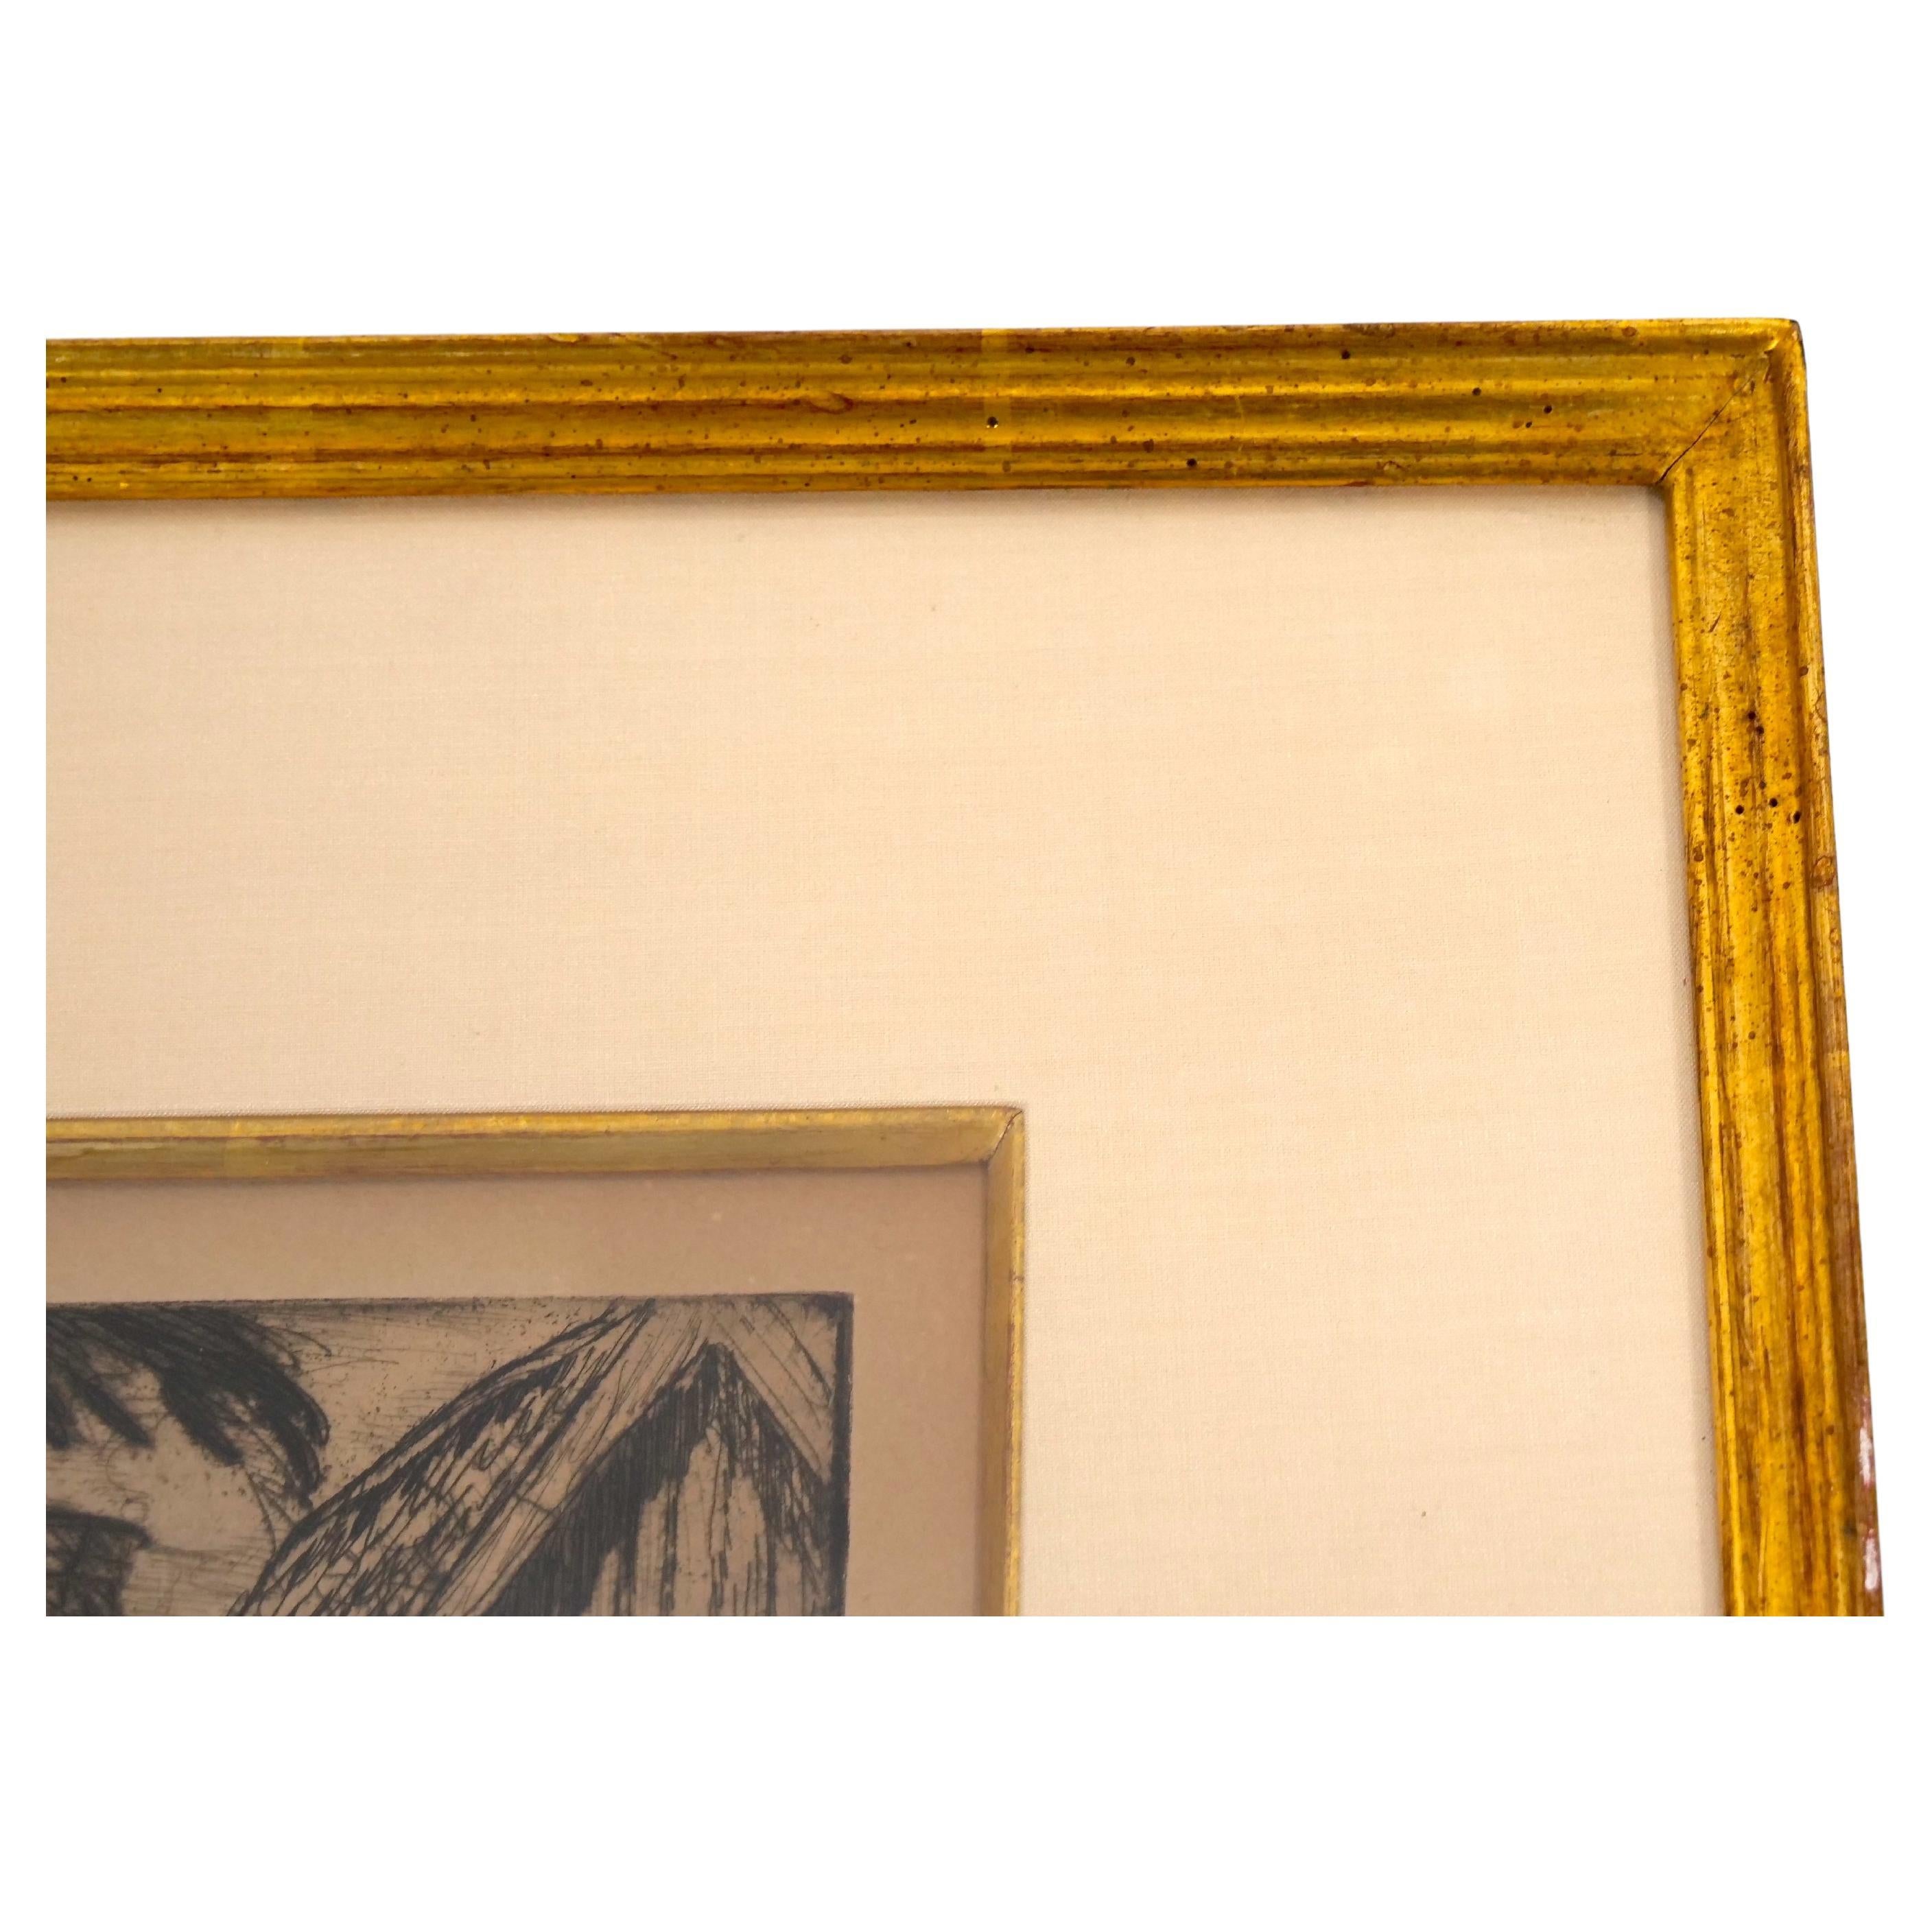 Swedish Two Framed Architectural Etchings by Olle Hjortzberg (1872-1959) For Sale